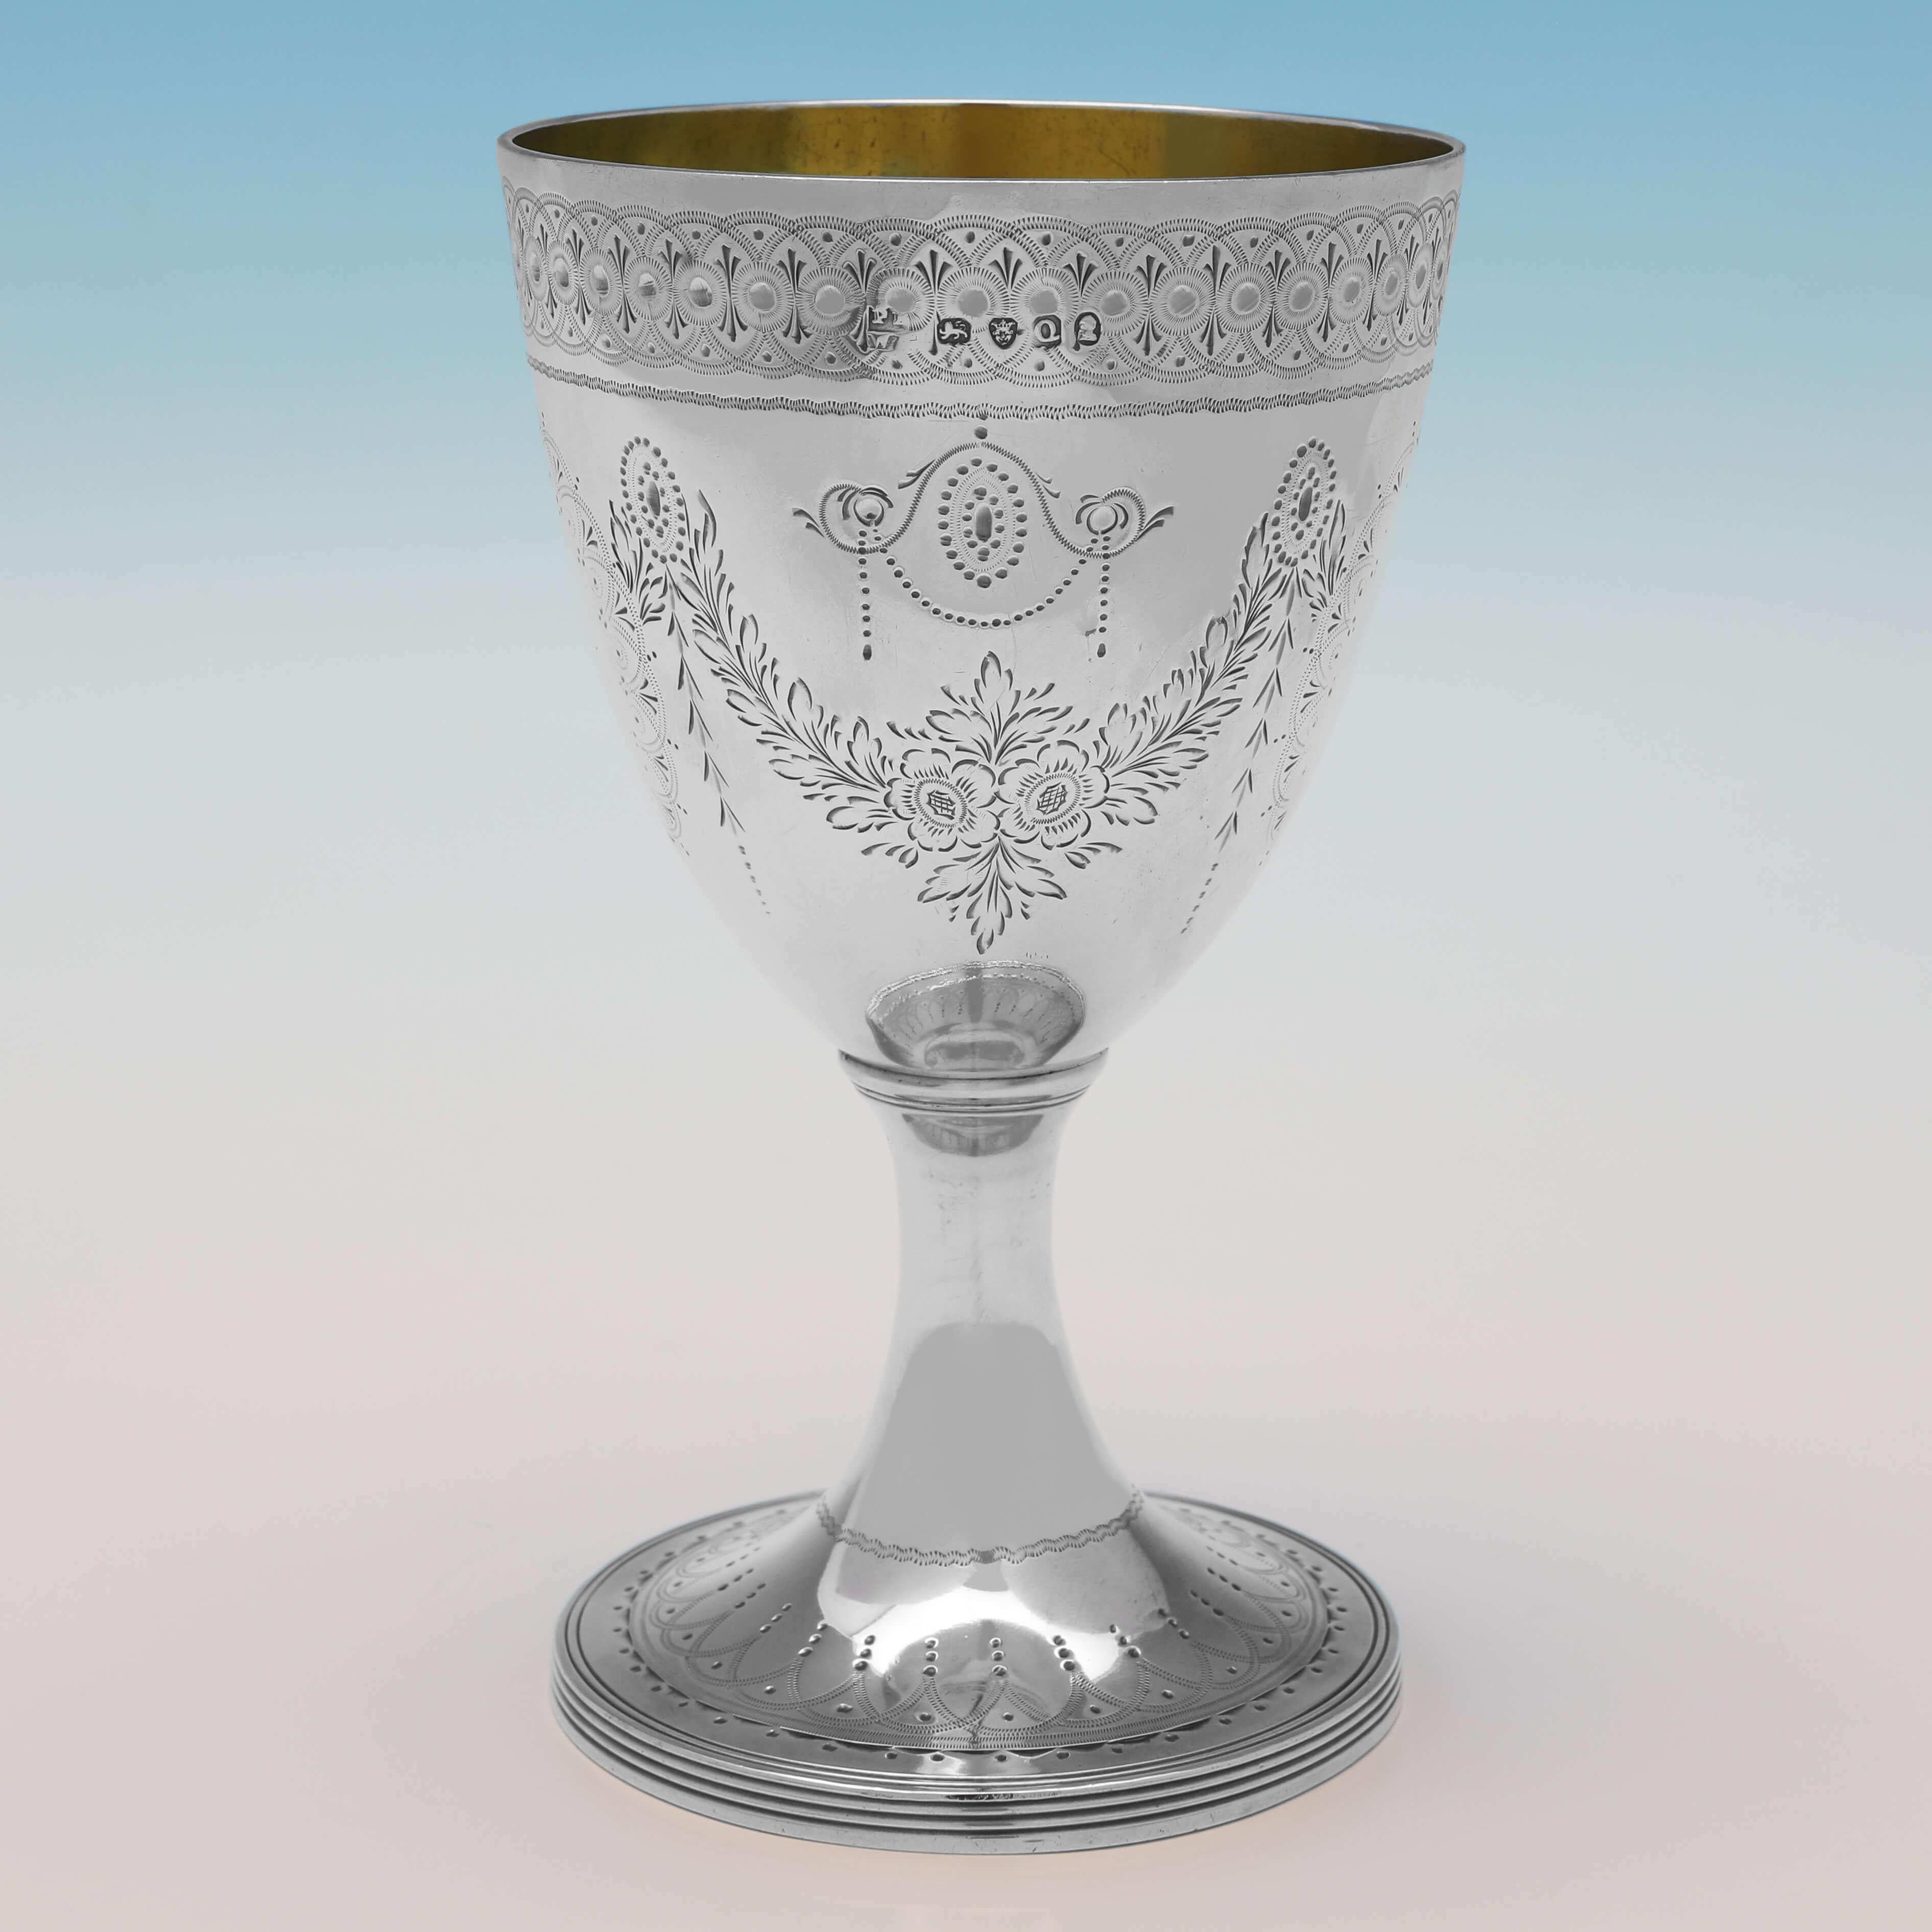 Hallmarked in London in 1811 by Peter & William Bateman, this stunning, Antique Sterling Silver Goblet, is in the neoclassical taste, featuring brightcut engraved decoration throughout, and a gilt interior. The goblet measures 5.75